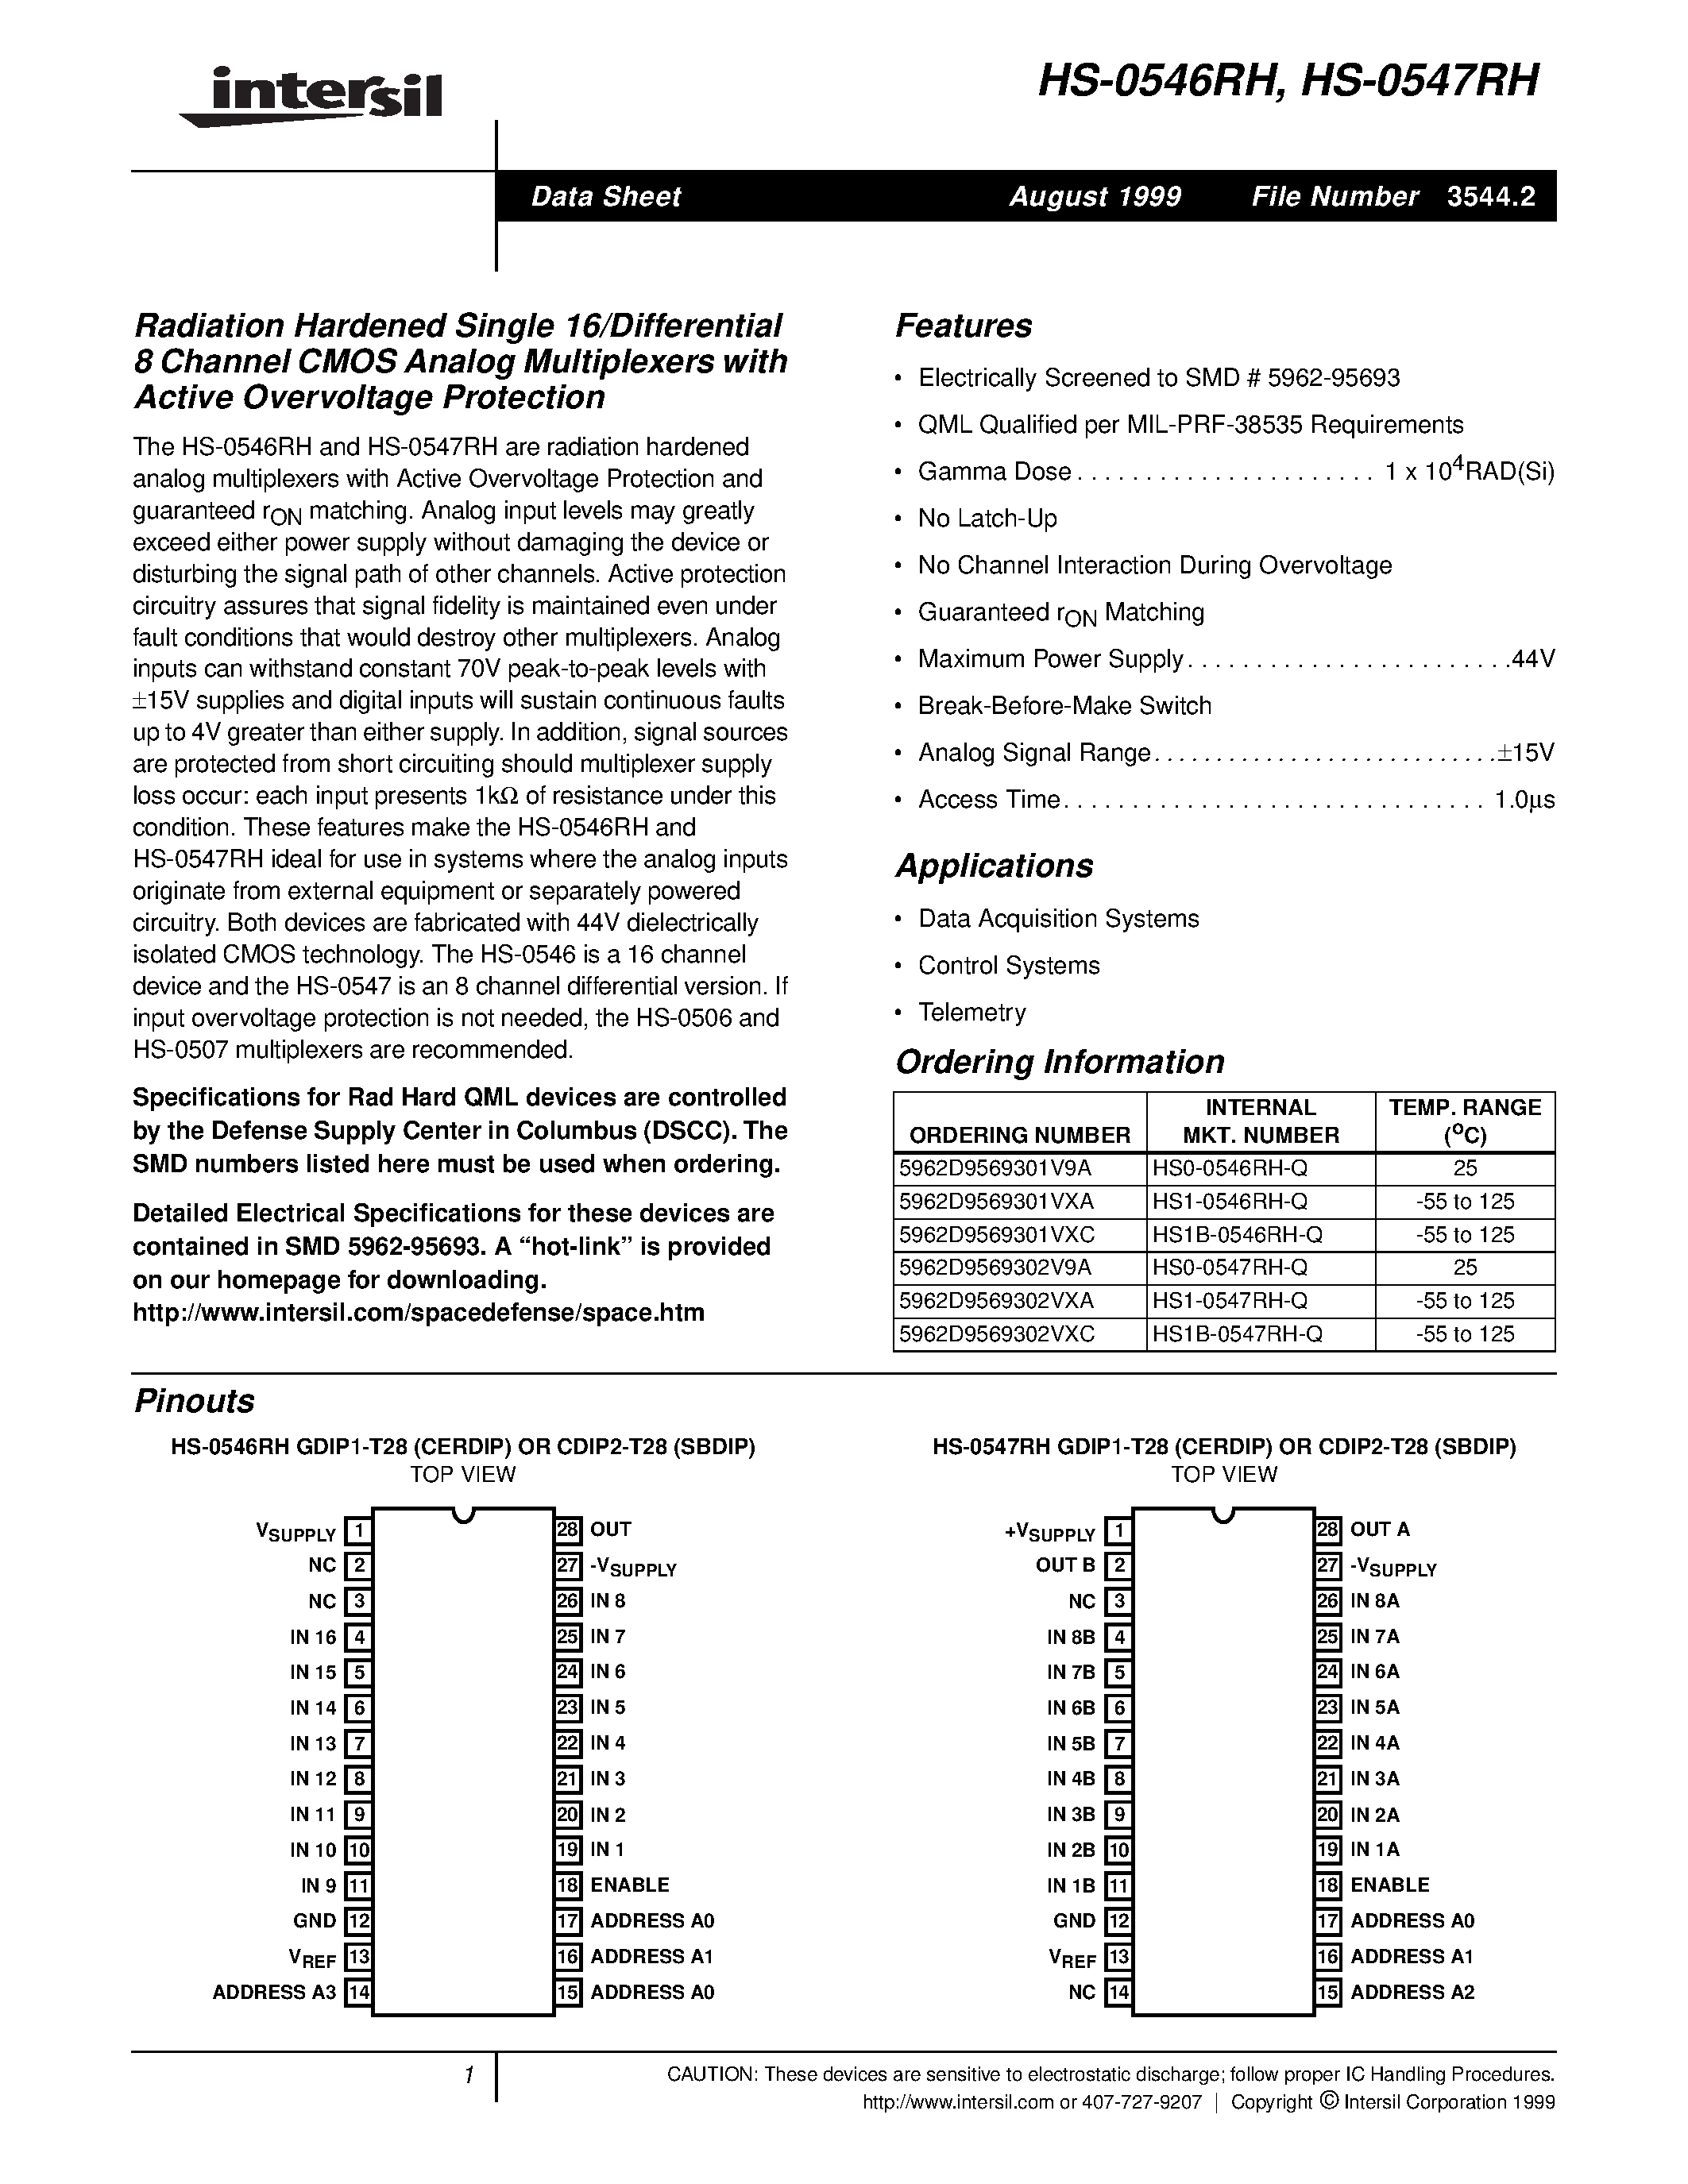 Datasheet HS1-0547RH-Q - Radiation Hardened Single 16/Differential 8 Channel CMOS Analog Multiplexers with Active Overvoltage Protection page 1